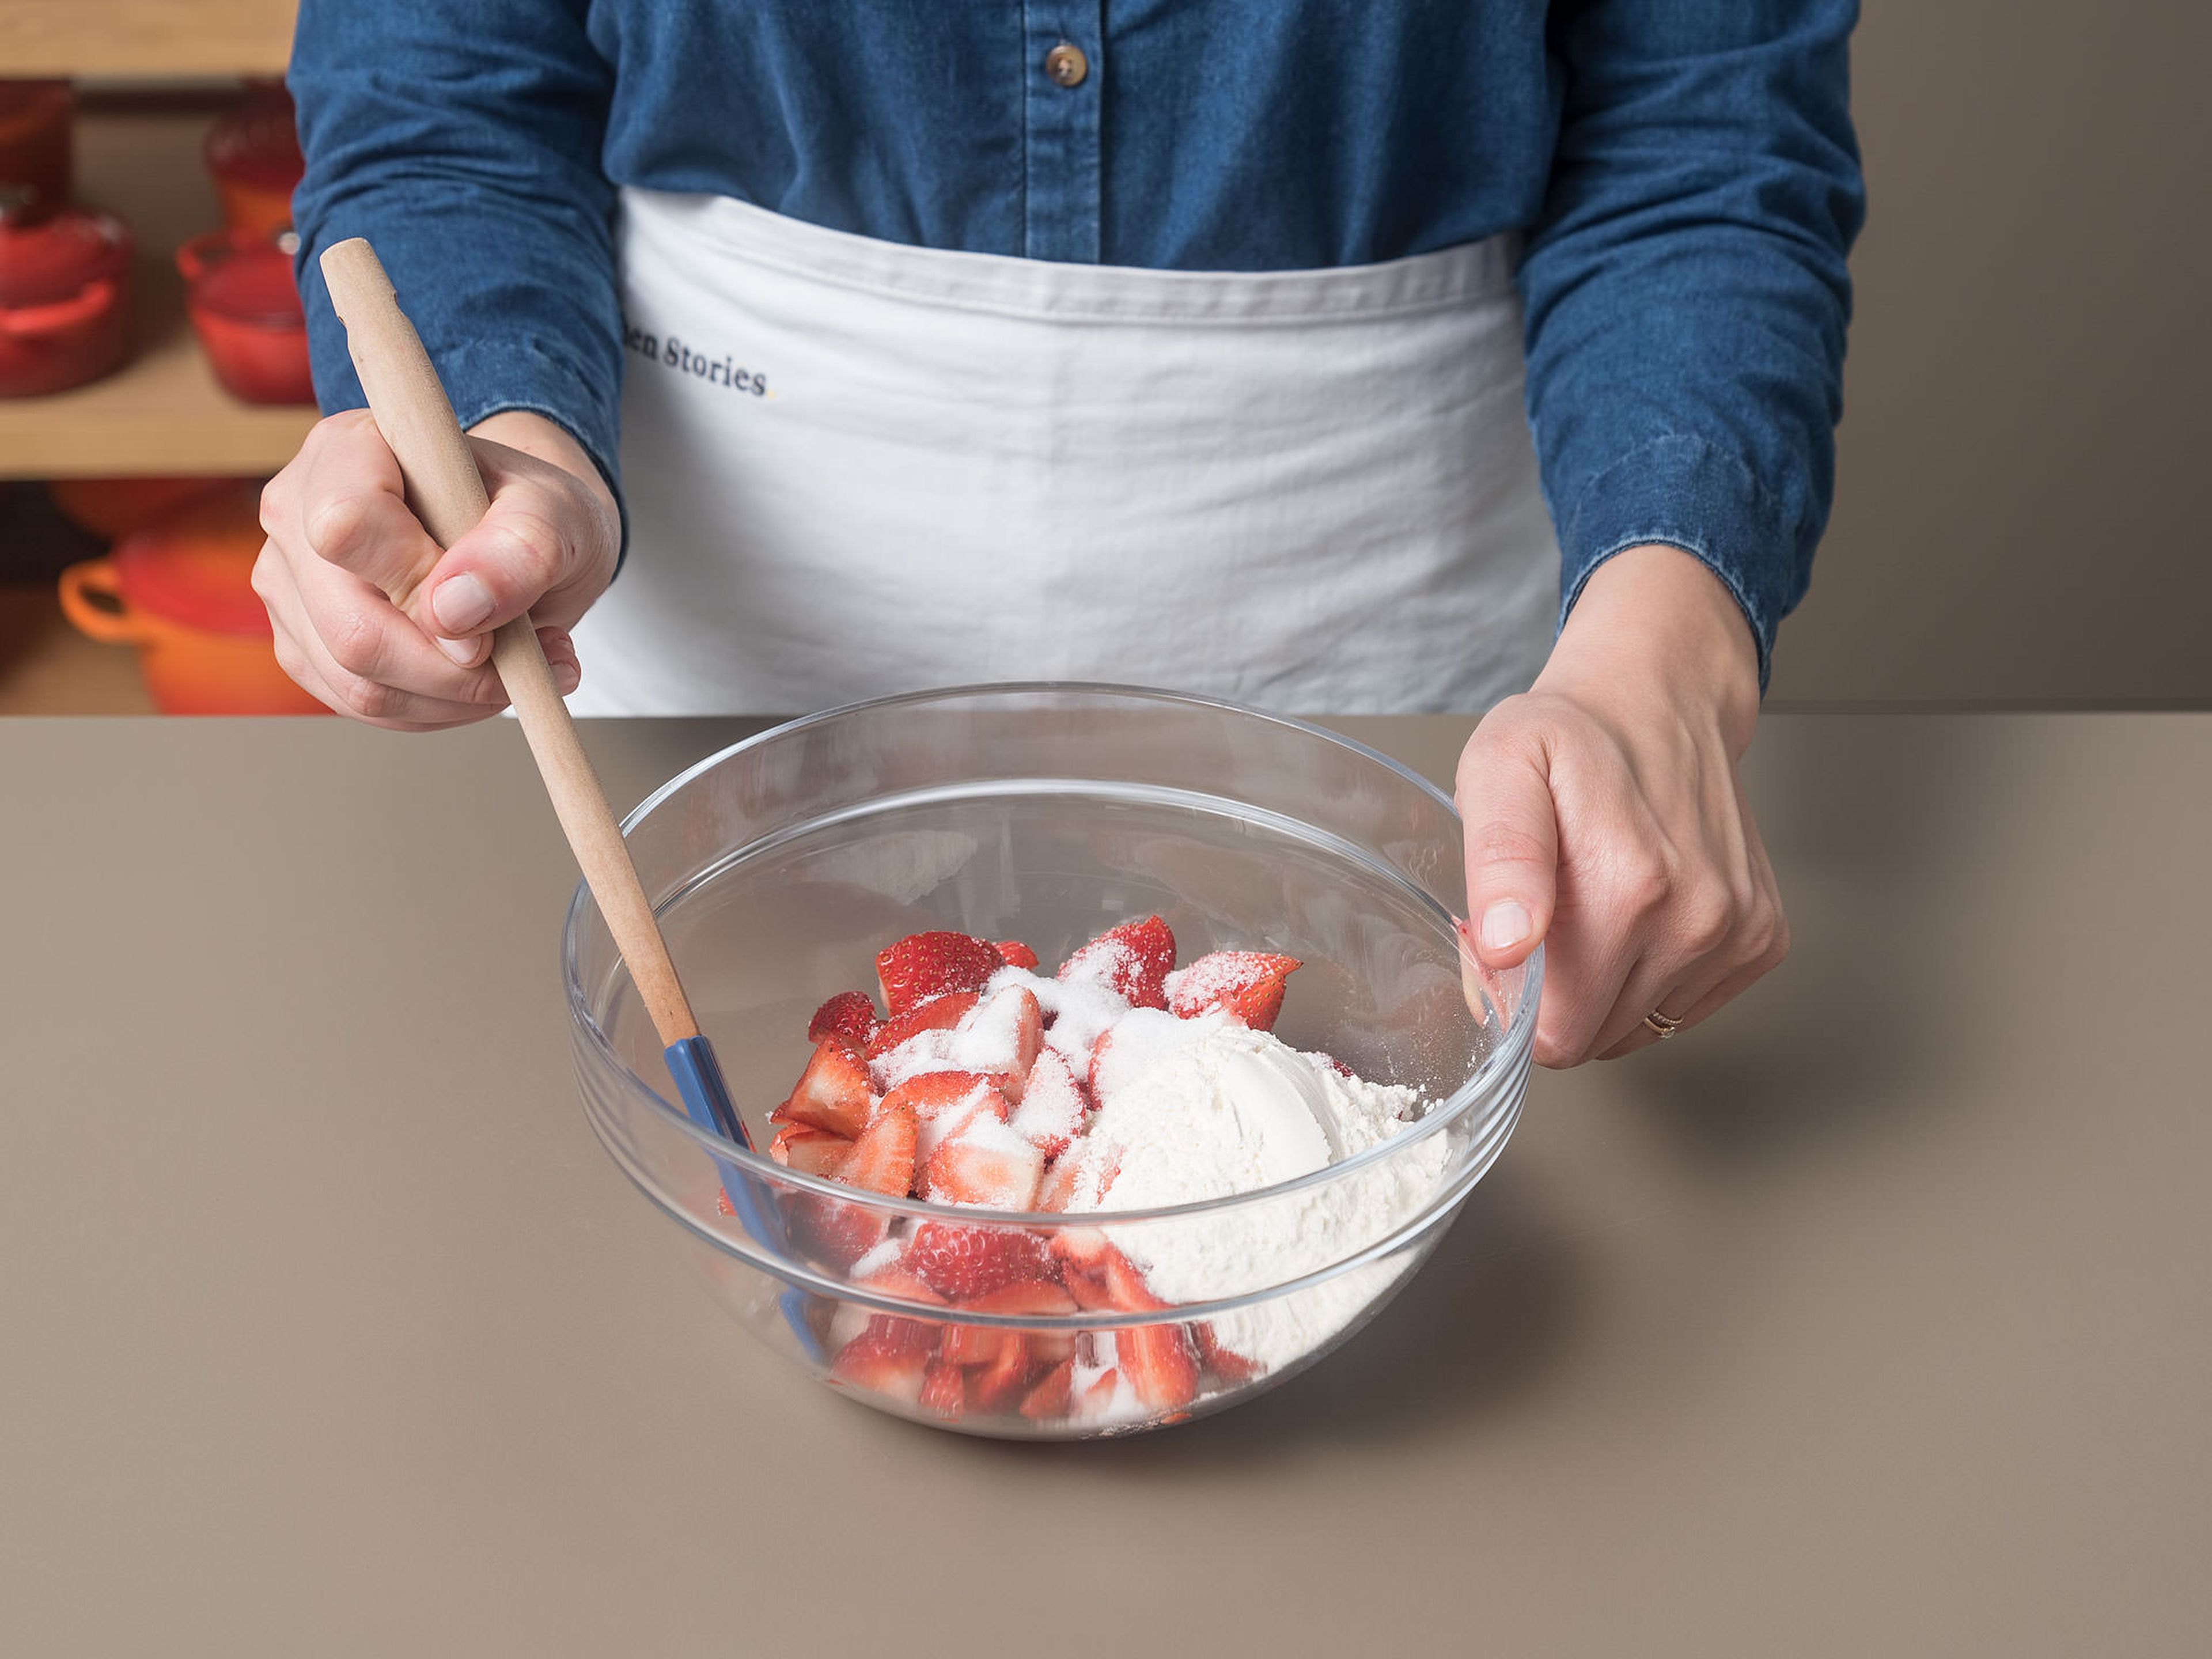 To make the strawberry layer, roughly chop strawberries. Combine strawberries, sugar, and flour in a large bowl. Set aside.